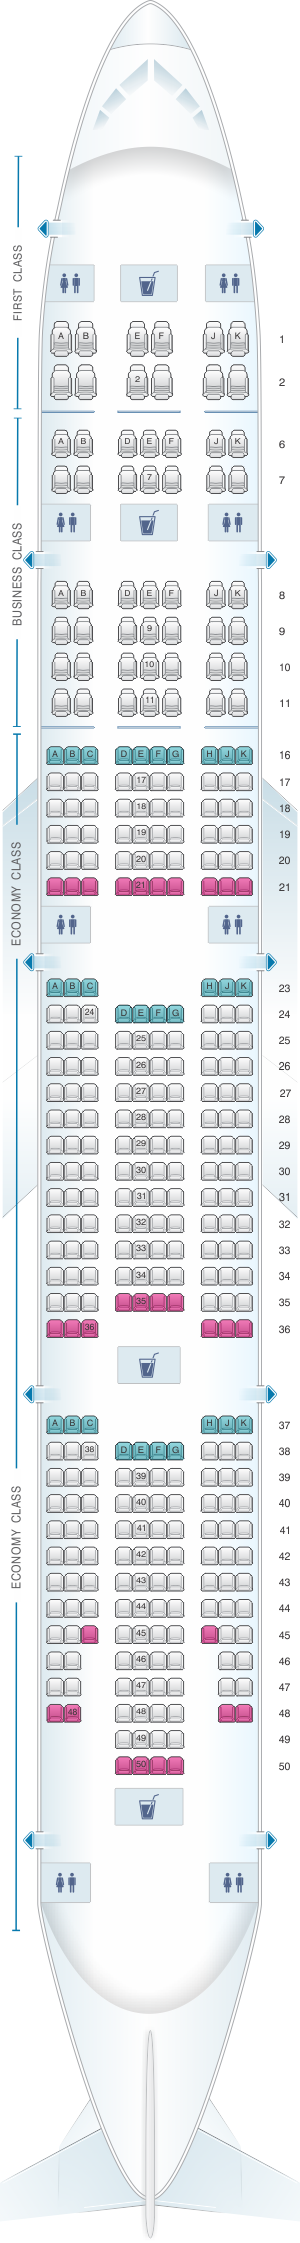 boeing 777 300er seat map        <h3 class=